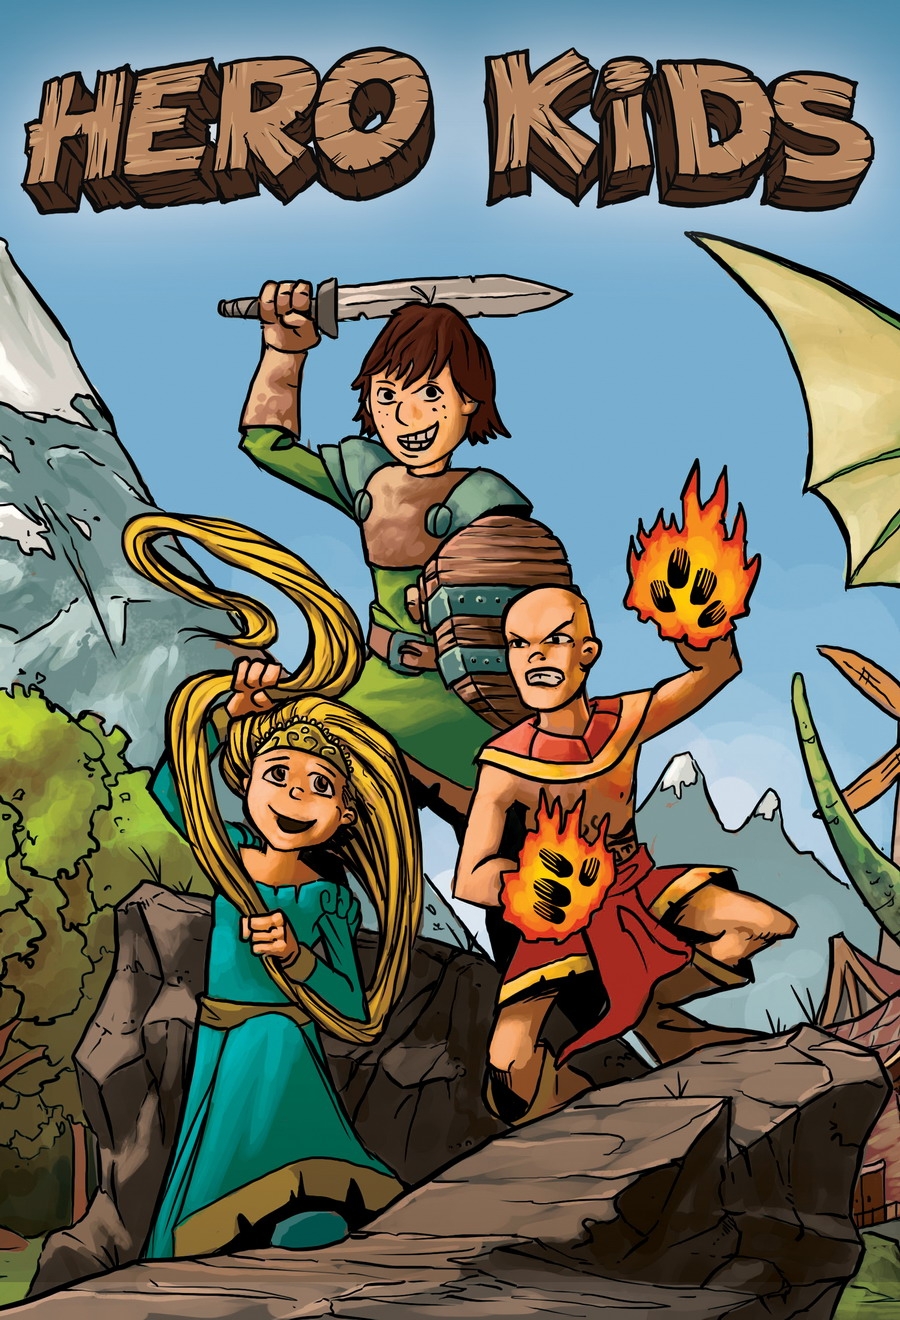 Hero Kids by Justin Halliday is part of the Family-Friendly RPGs offer at the Bundle of Holding